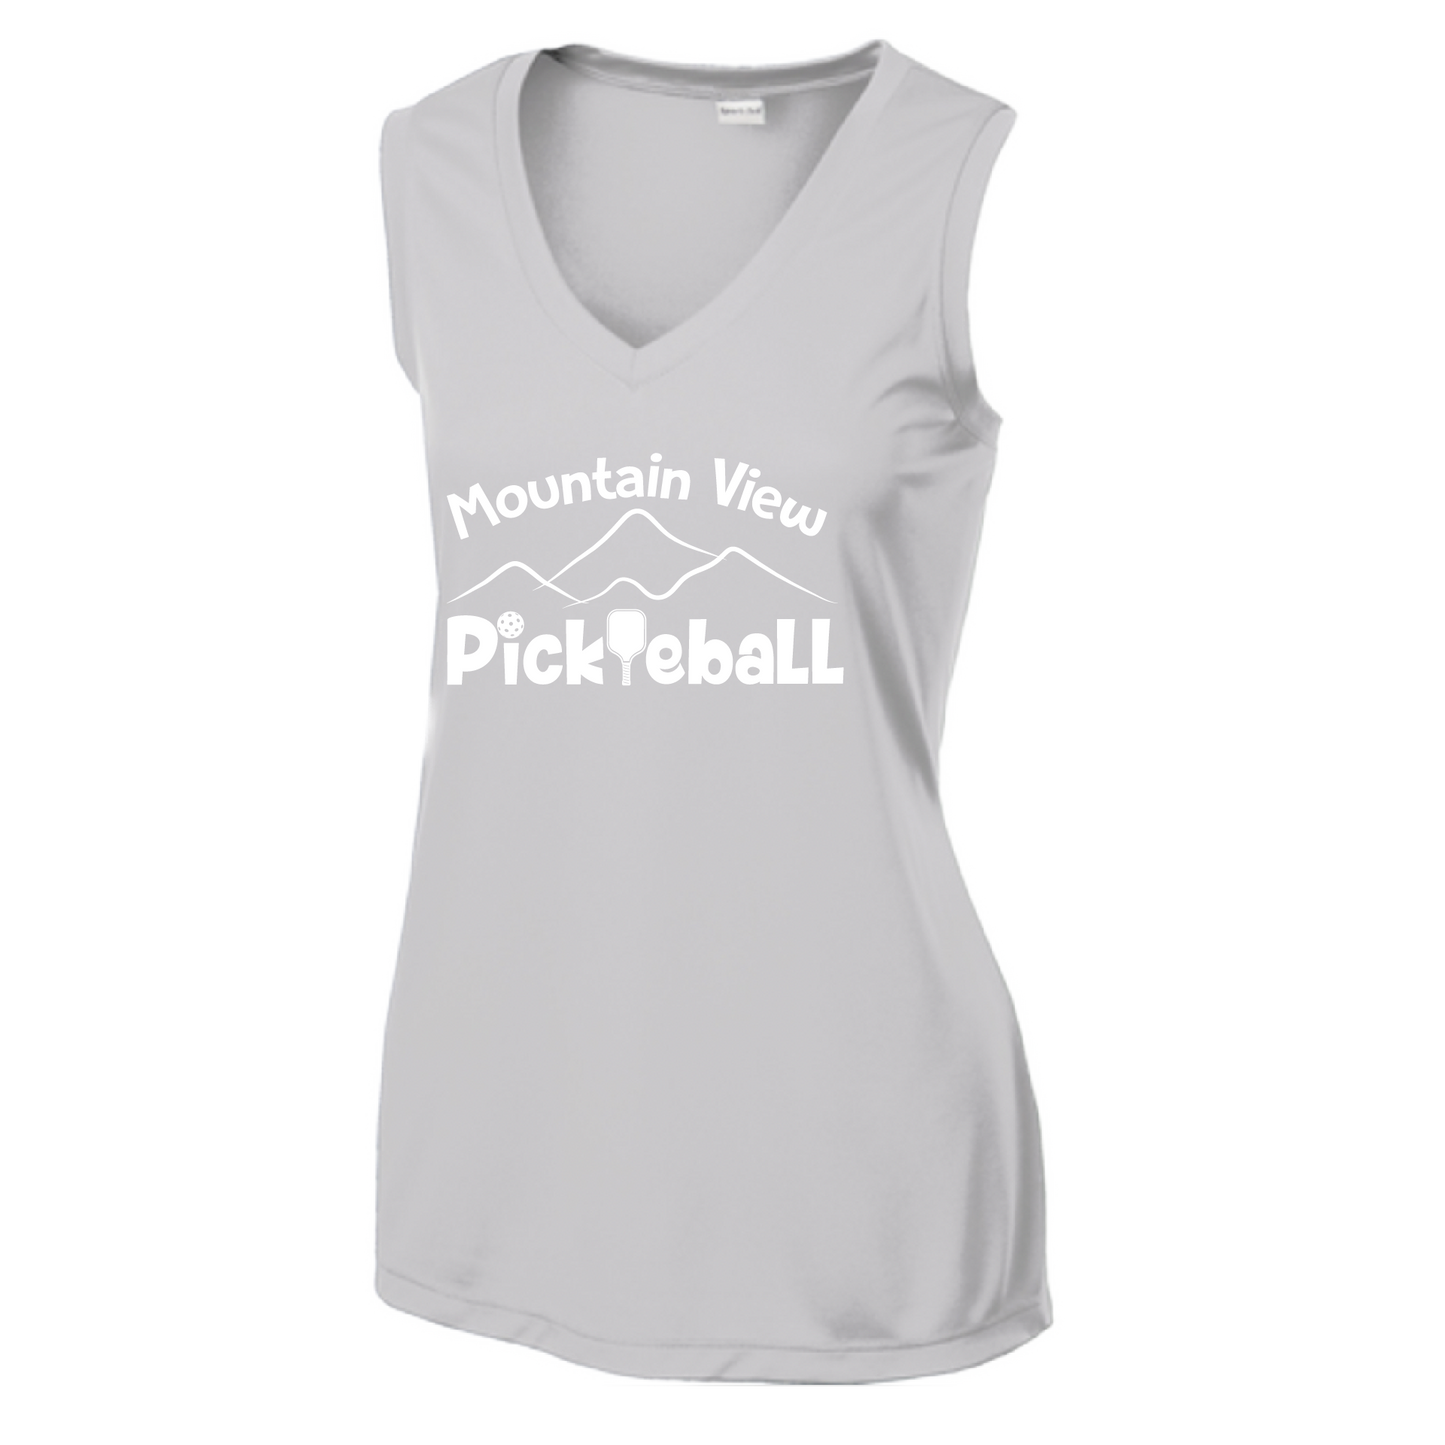 Pickleball Design: Mountain View Pickleball Club  Women's Style: Sleeveless Tank  Turn up the volume in this Women's shirt with its perfect mix of softness and attitude. Material is ultra-comfortable with moisture wicking properties and tri-blend softness. PosiCharge technology locks in color. Highly breathable and lightweight.